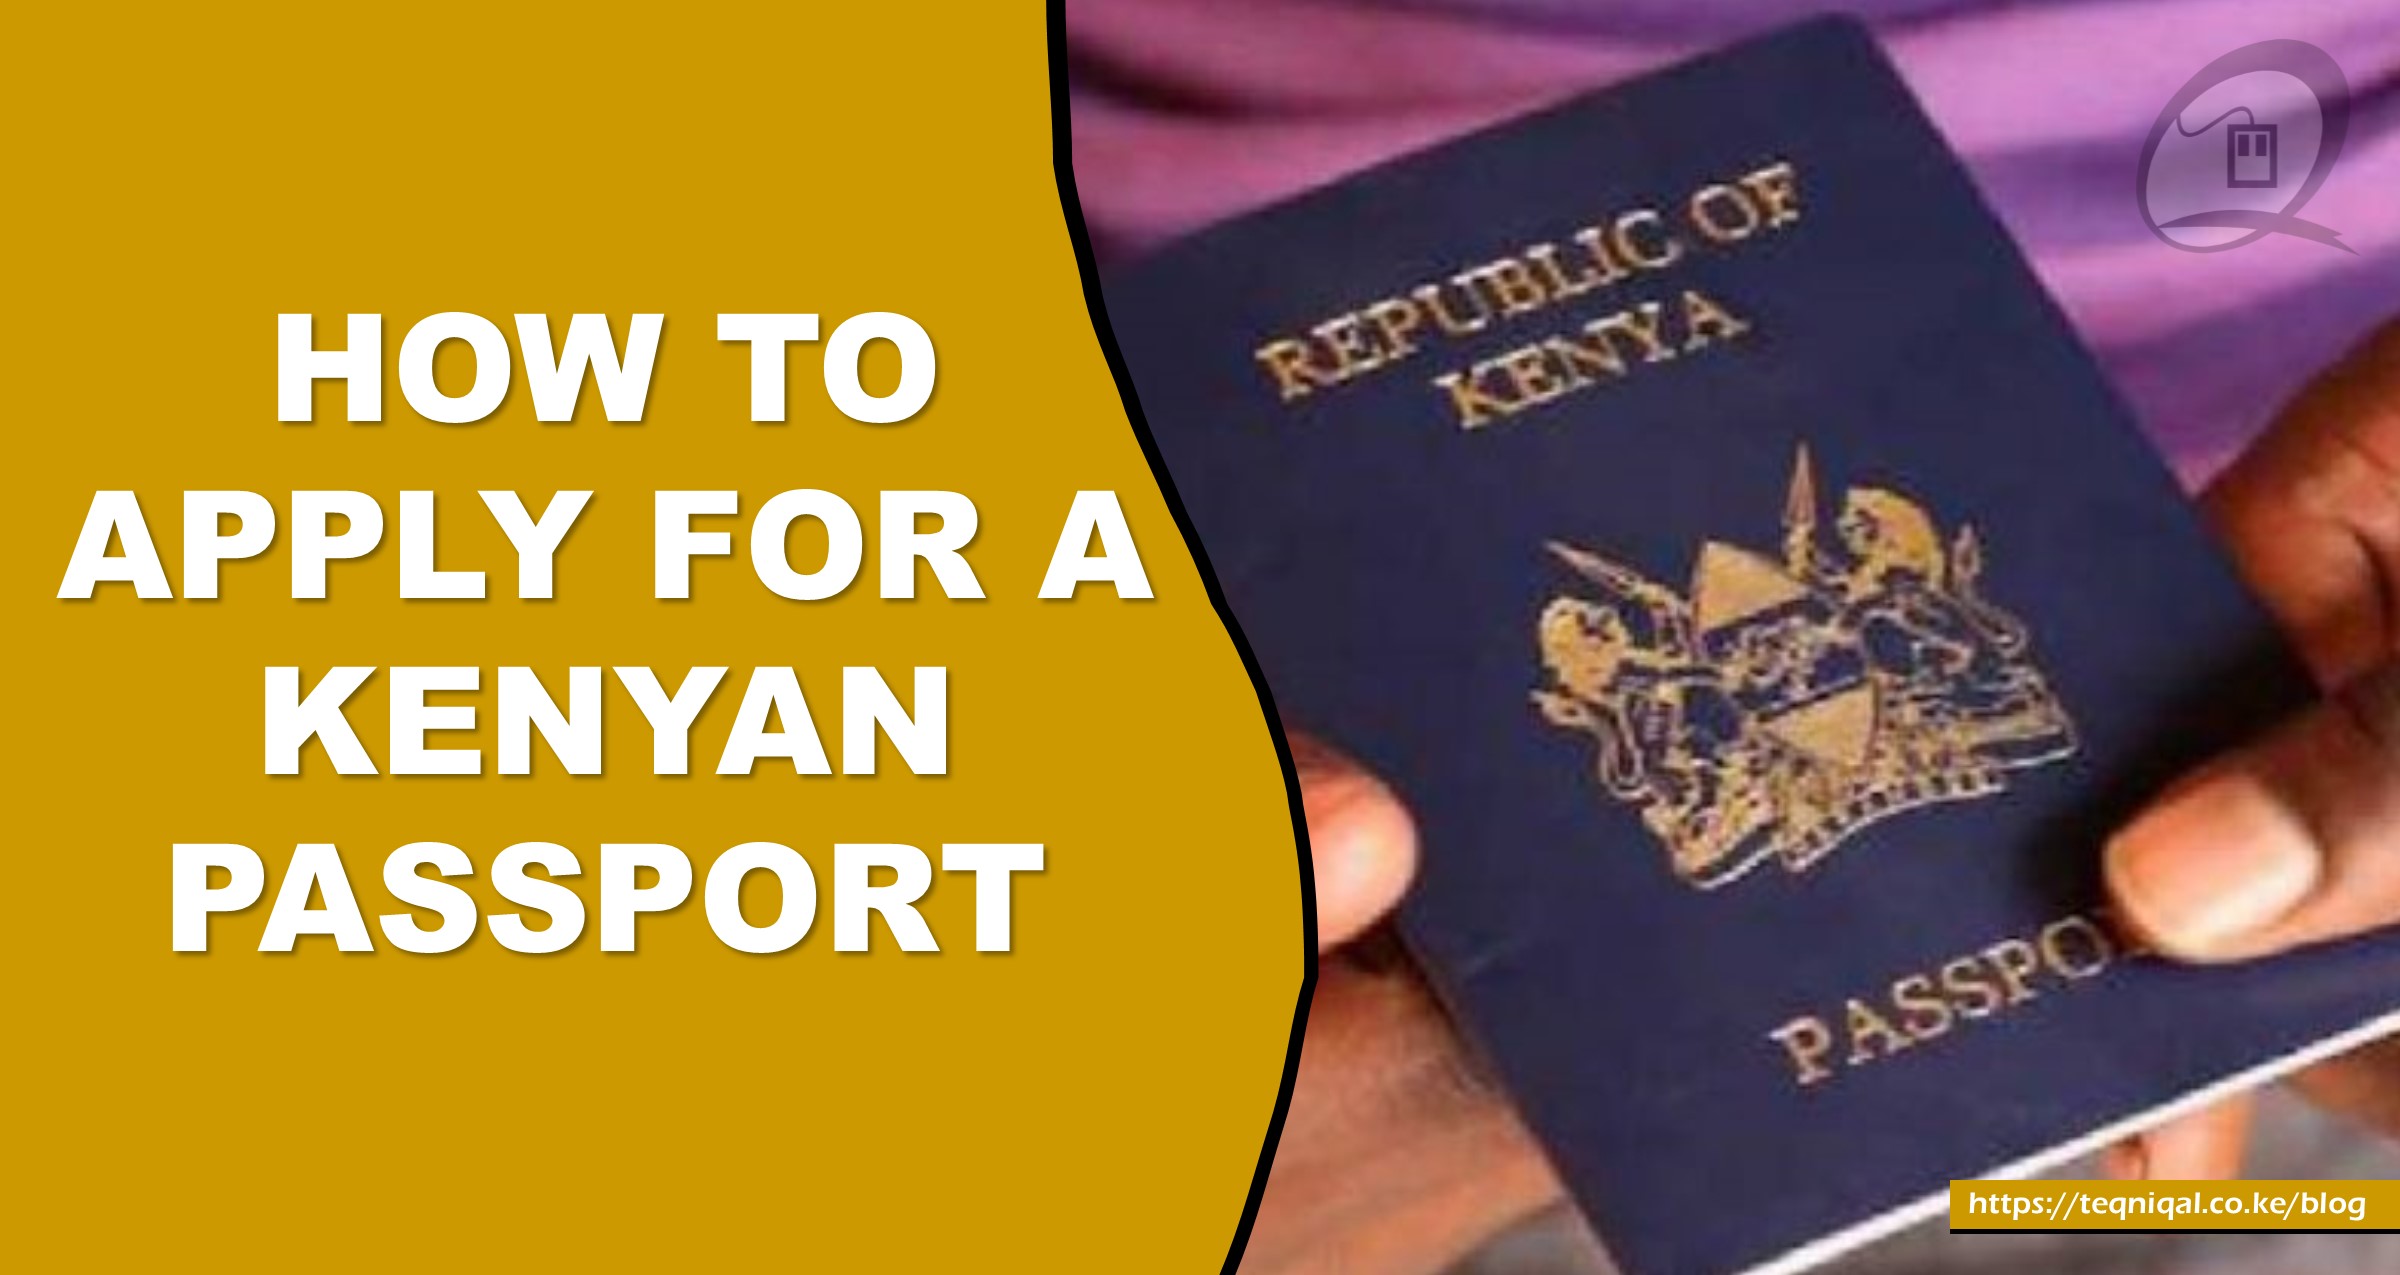 How to Apply for a Kenyan Passport